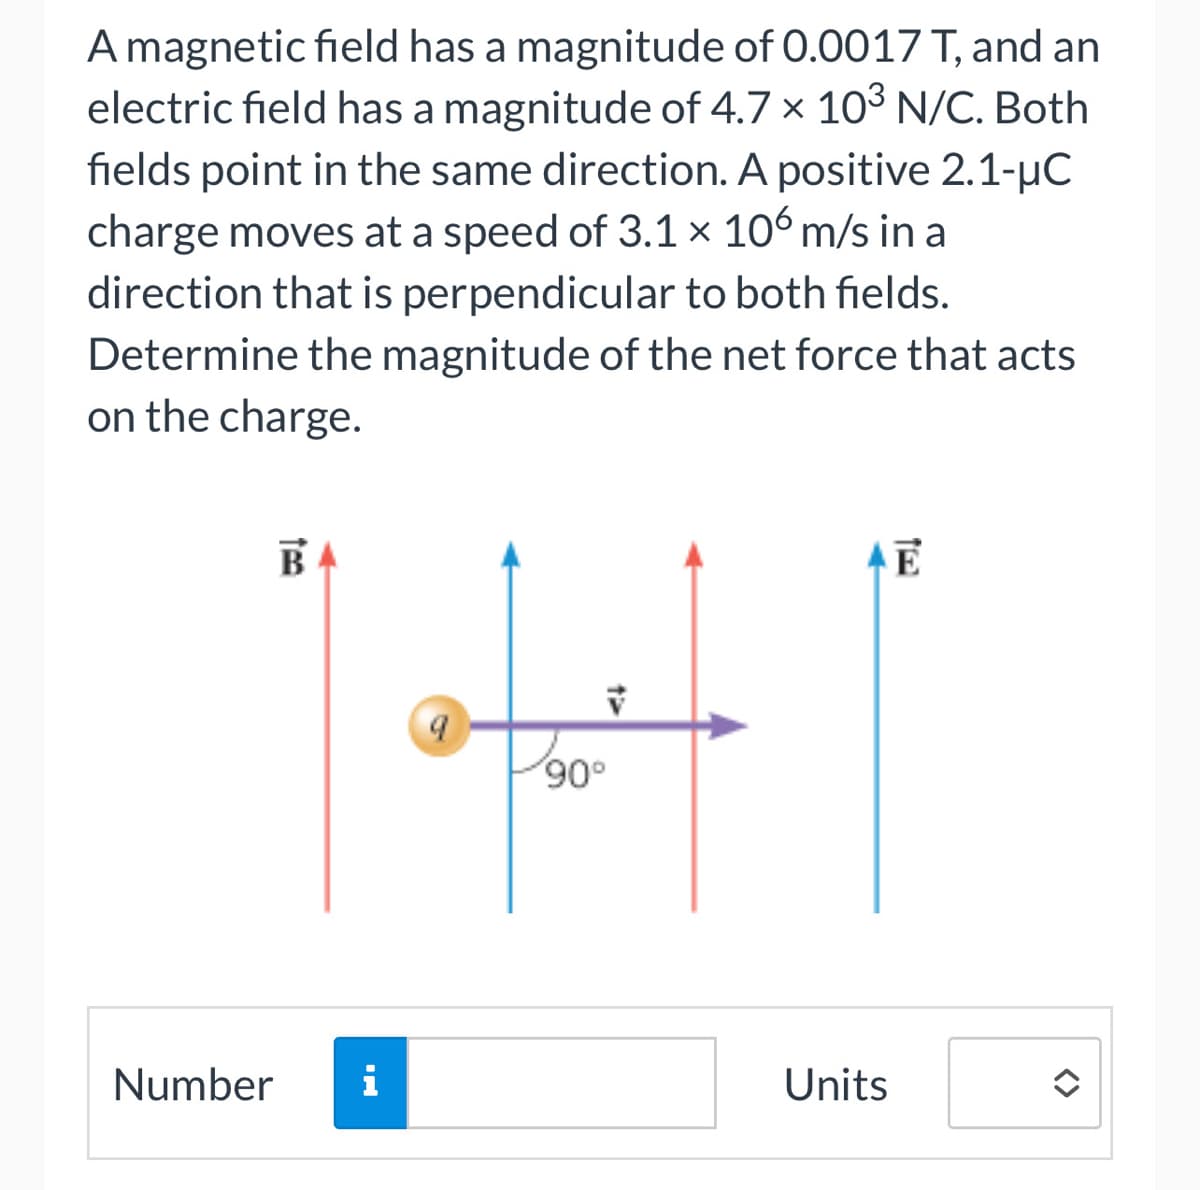 A magnetic field has a magnitude of 0.0017 T, and an
electric field has a magnitude of 4.7 x 103 N/C. Both
fields point in the same direction. A positive 2.1-μC
charge moves at a speed of 3.1 x 106 m/s in a
direction that is perpendicular to both fields.
Determine the magnitude of the net force that acts
on the charge.
B
Number i
9
V
90°
Units
E
<>